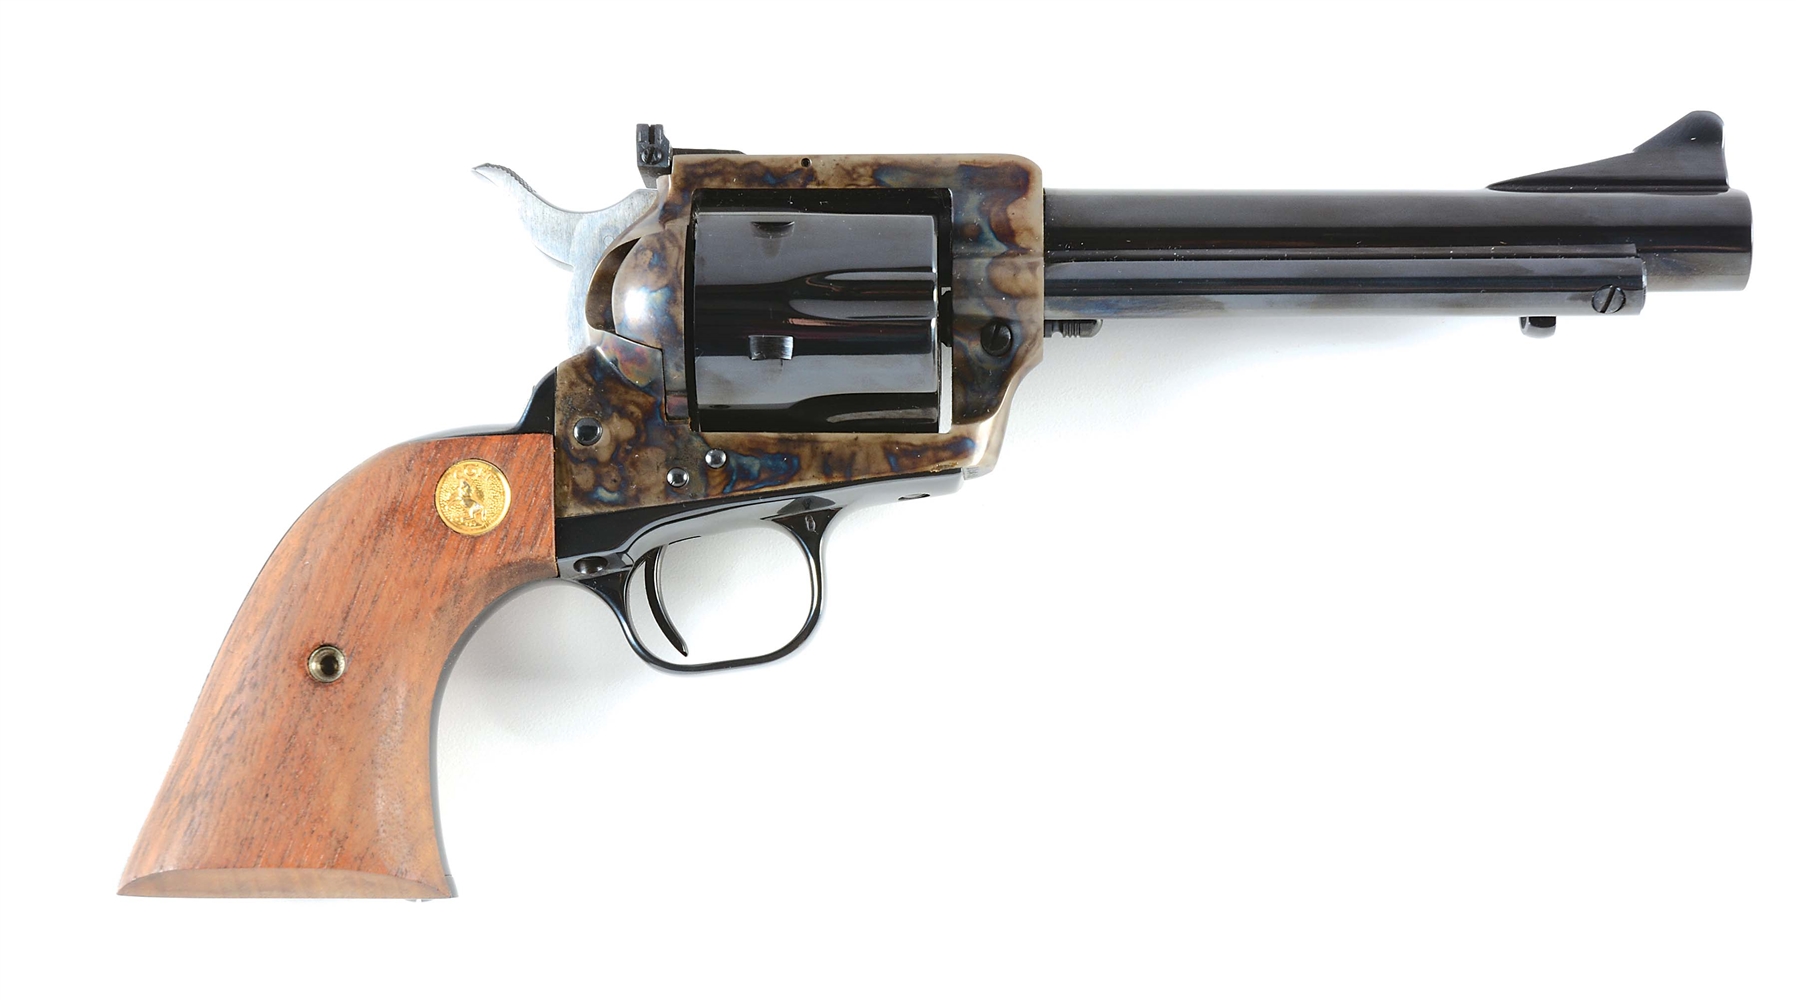 (M) BOXED 3RD GENERATION COLT NEW FRONTIER SINGLE ACTION REVOLVER (1980).